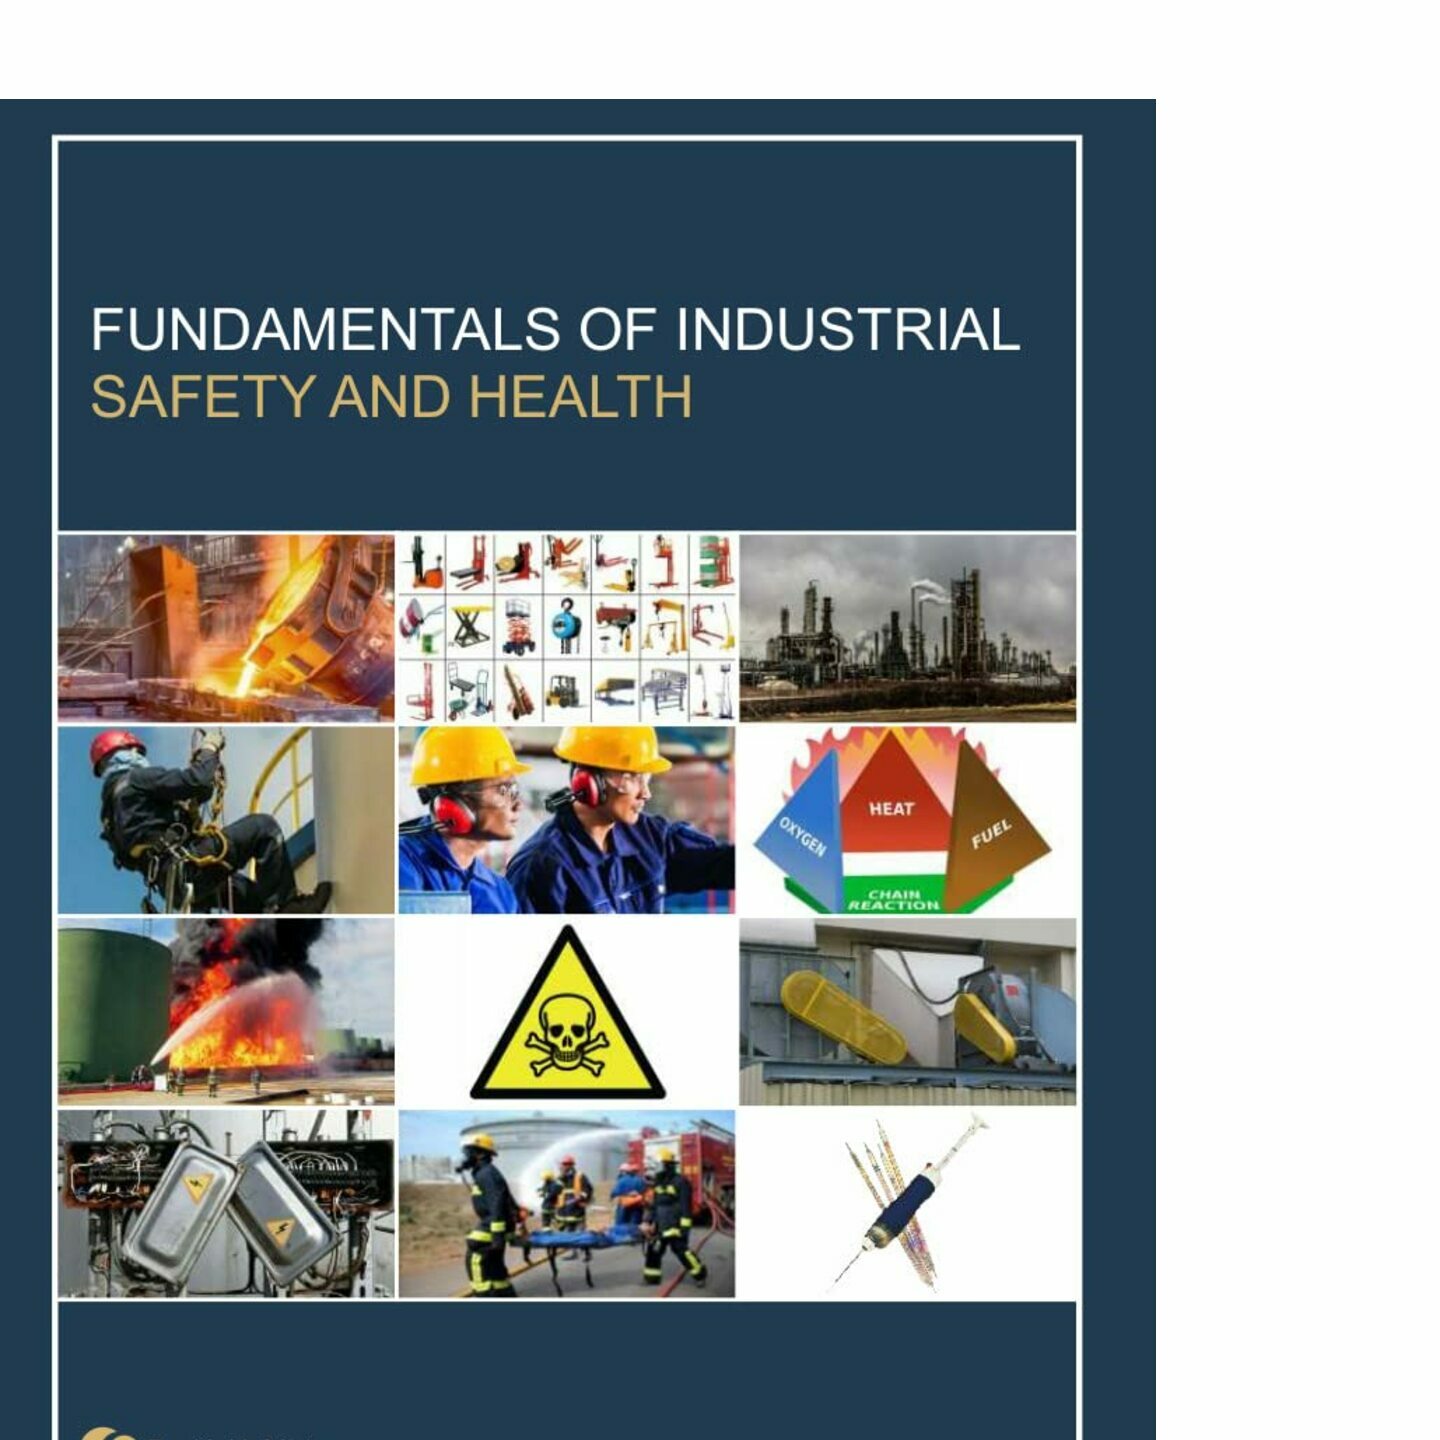 FUNDAMENTALS OF INDUSTRIAL SAFETY AND HEALTH by Dr K U Mistry Vol 1 & 2